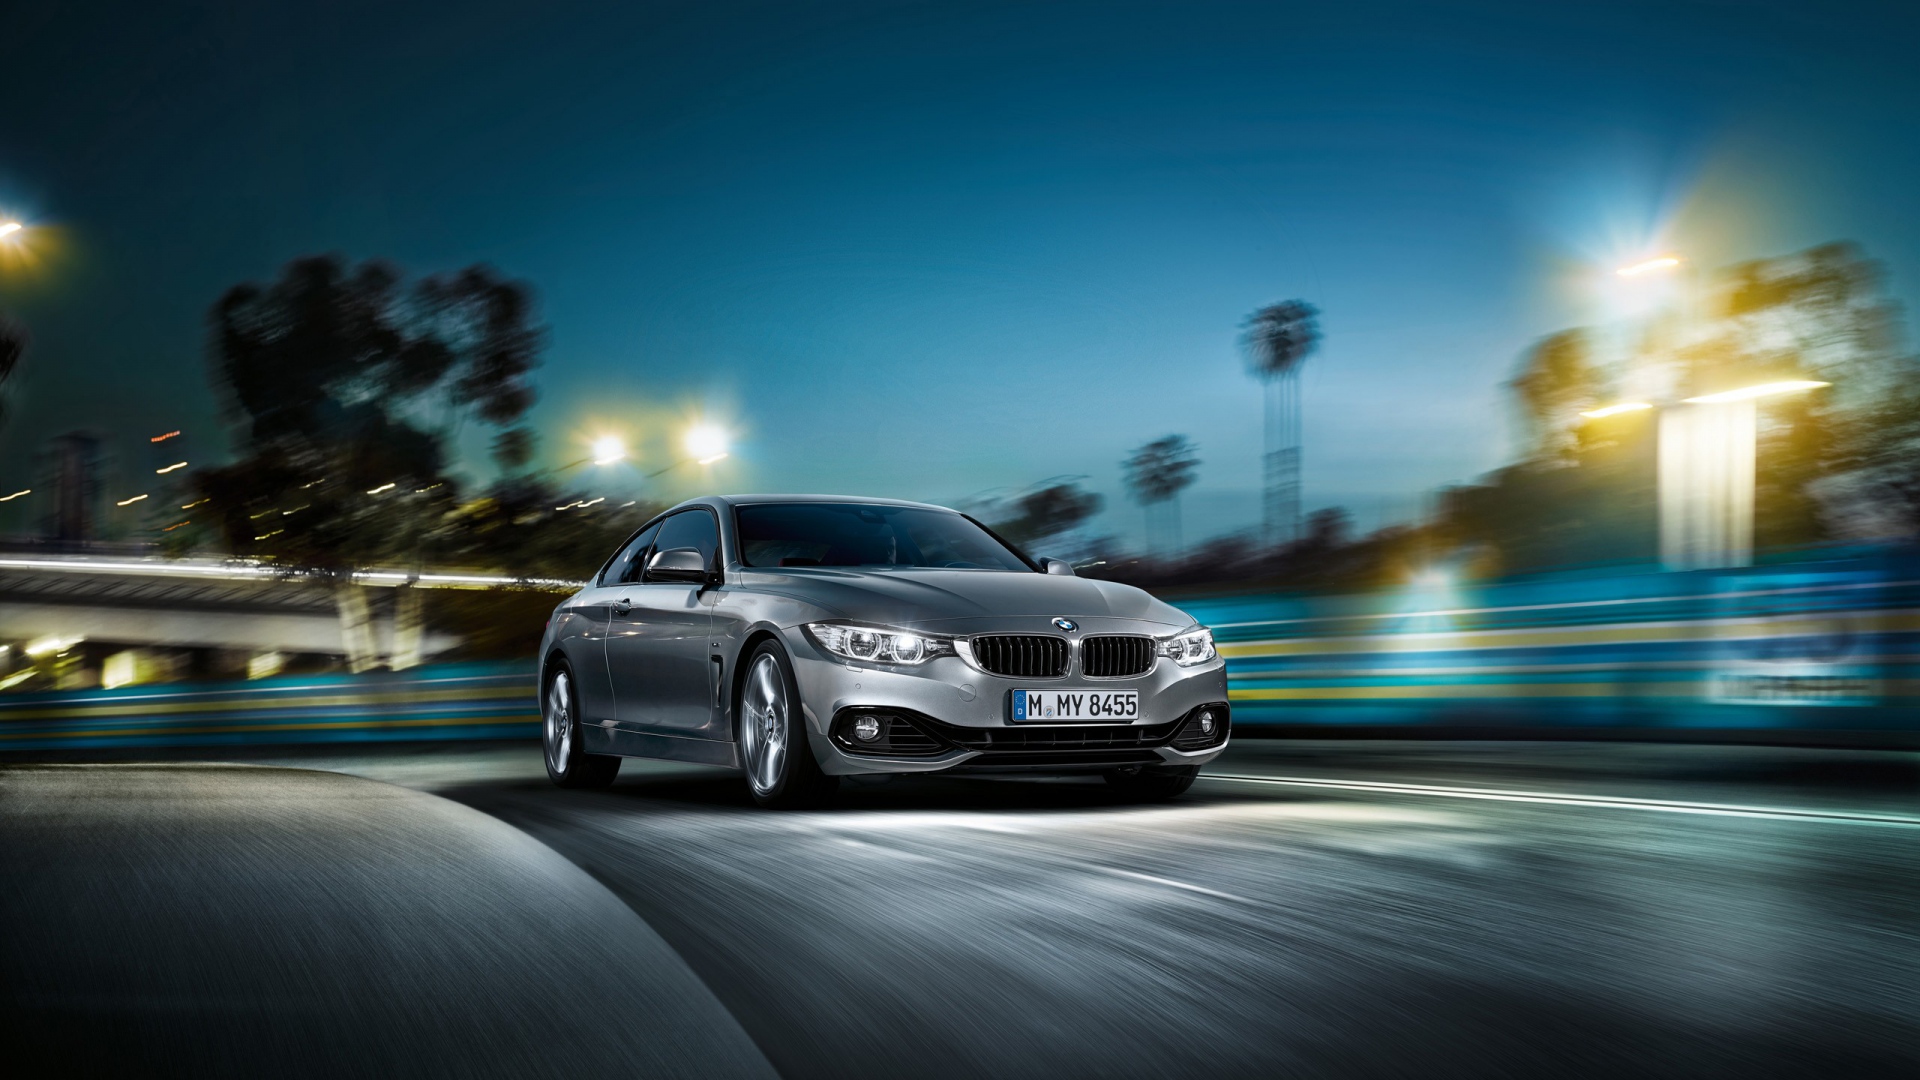 Bmw 4 Series Coupe Auto Wallpapers - Bmw 4 Series Hd - HD Wallpaper 